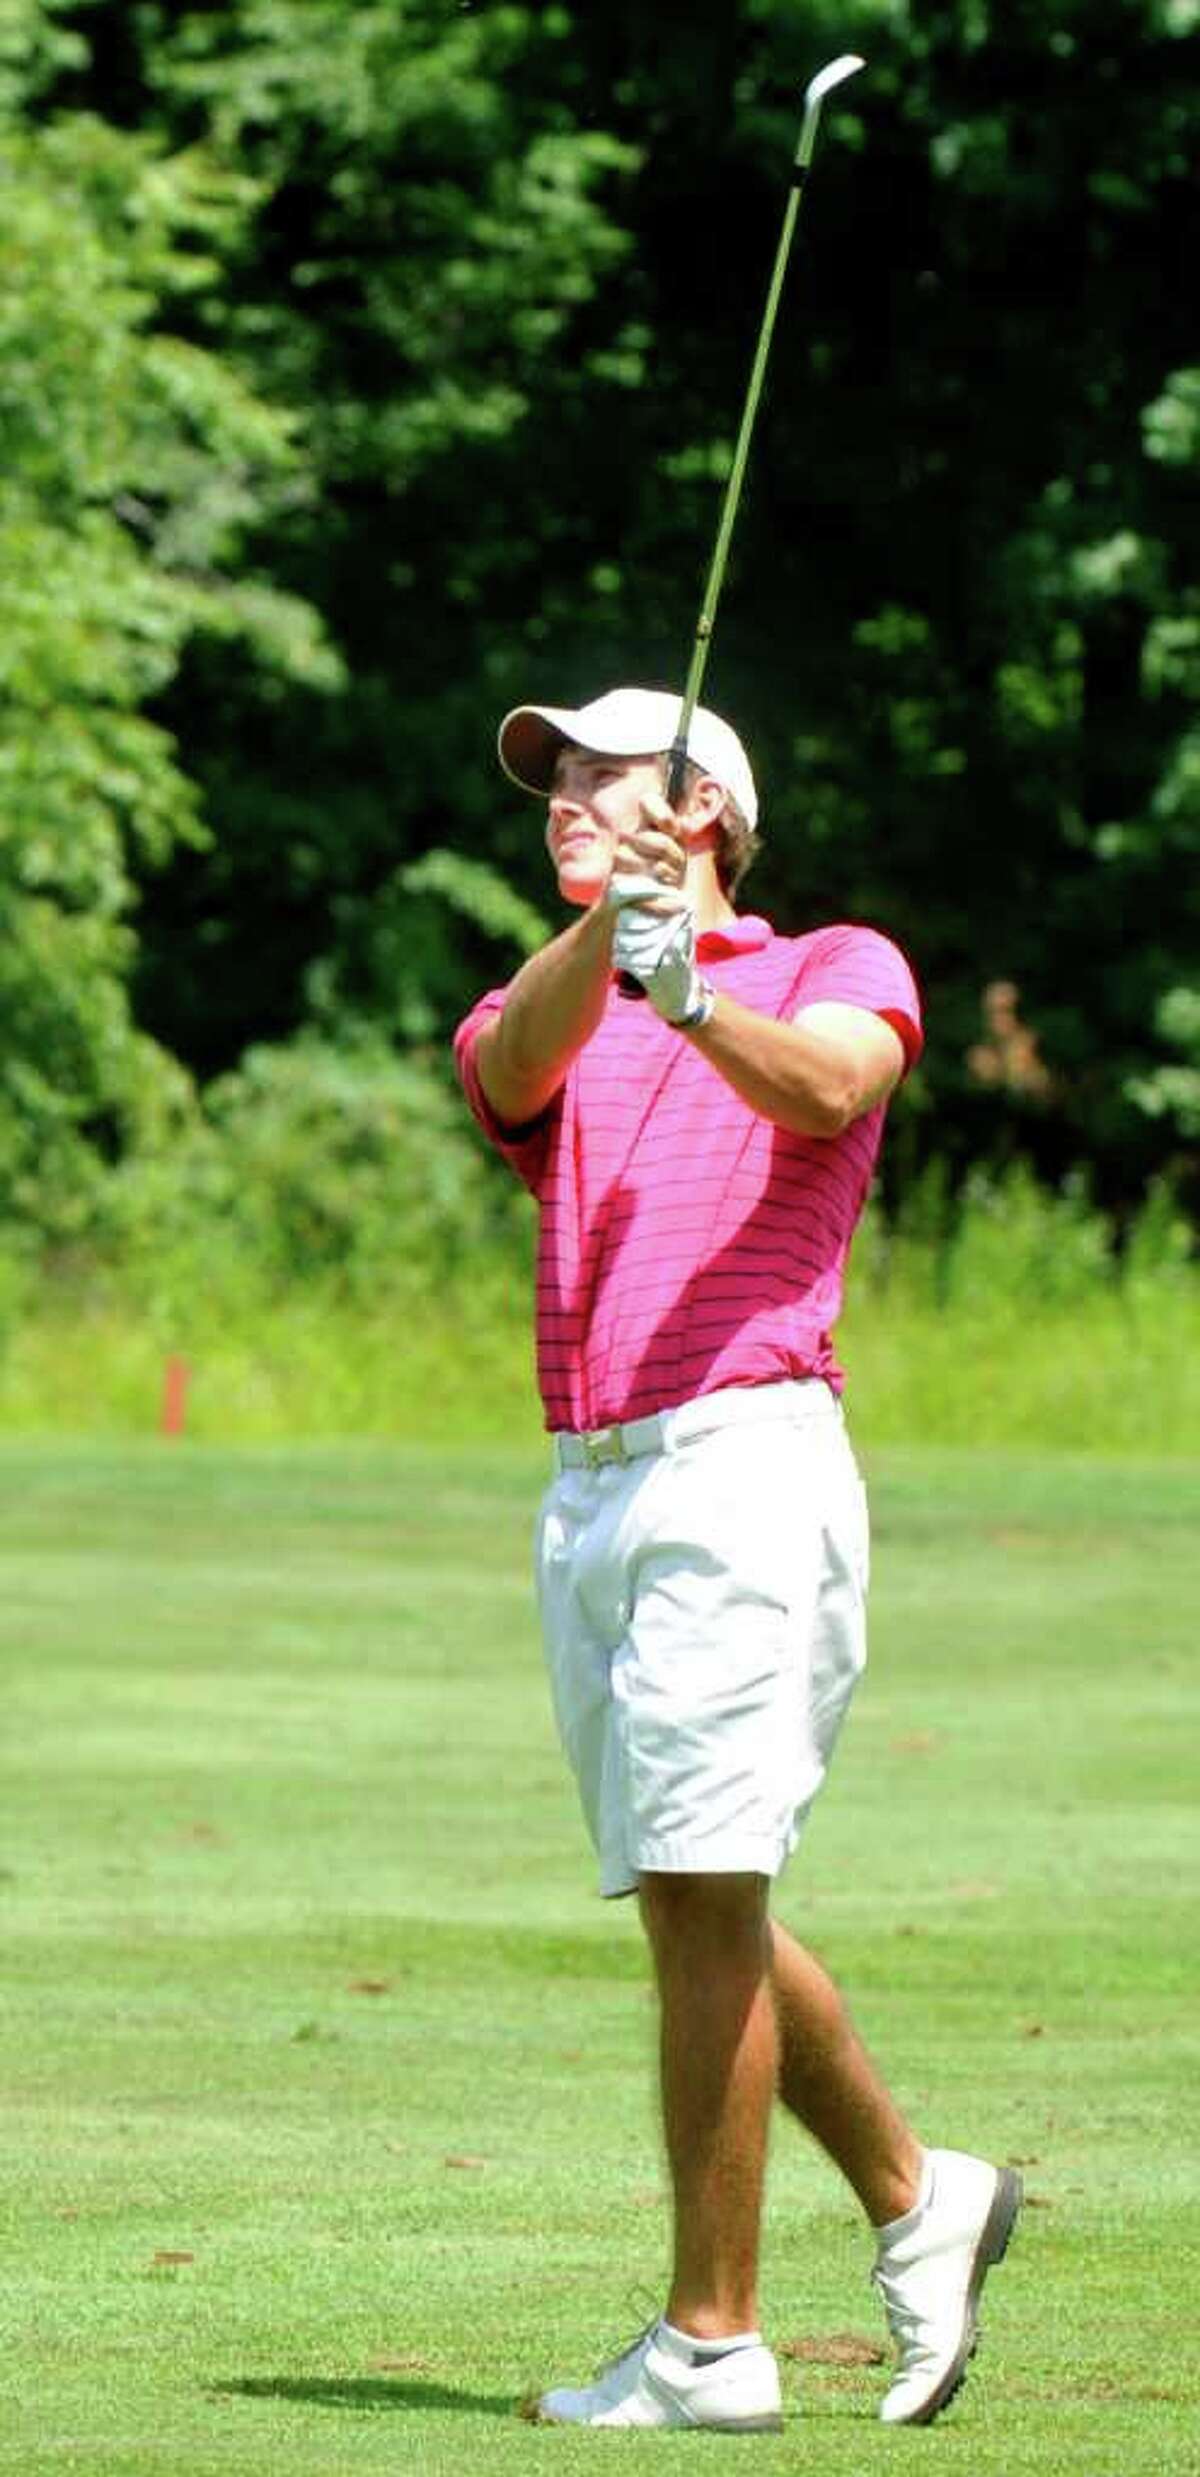 James Smith plays in the 21st annual Danbury Amateur golf tournament at Richter Park Golf Course Saturday, July 16, 2011.